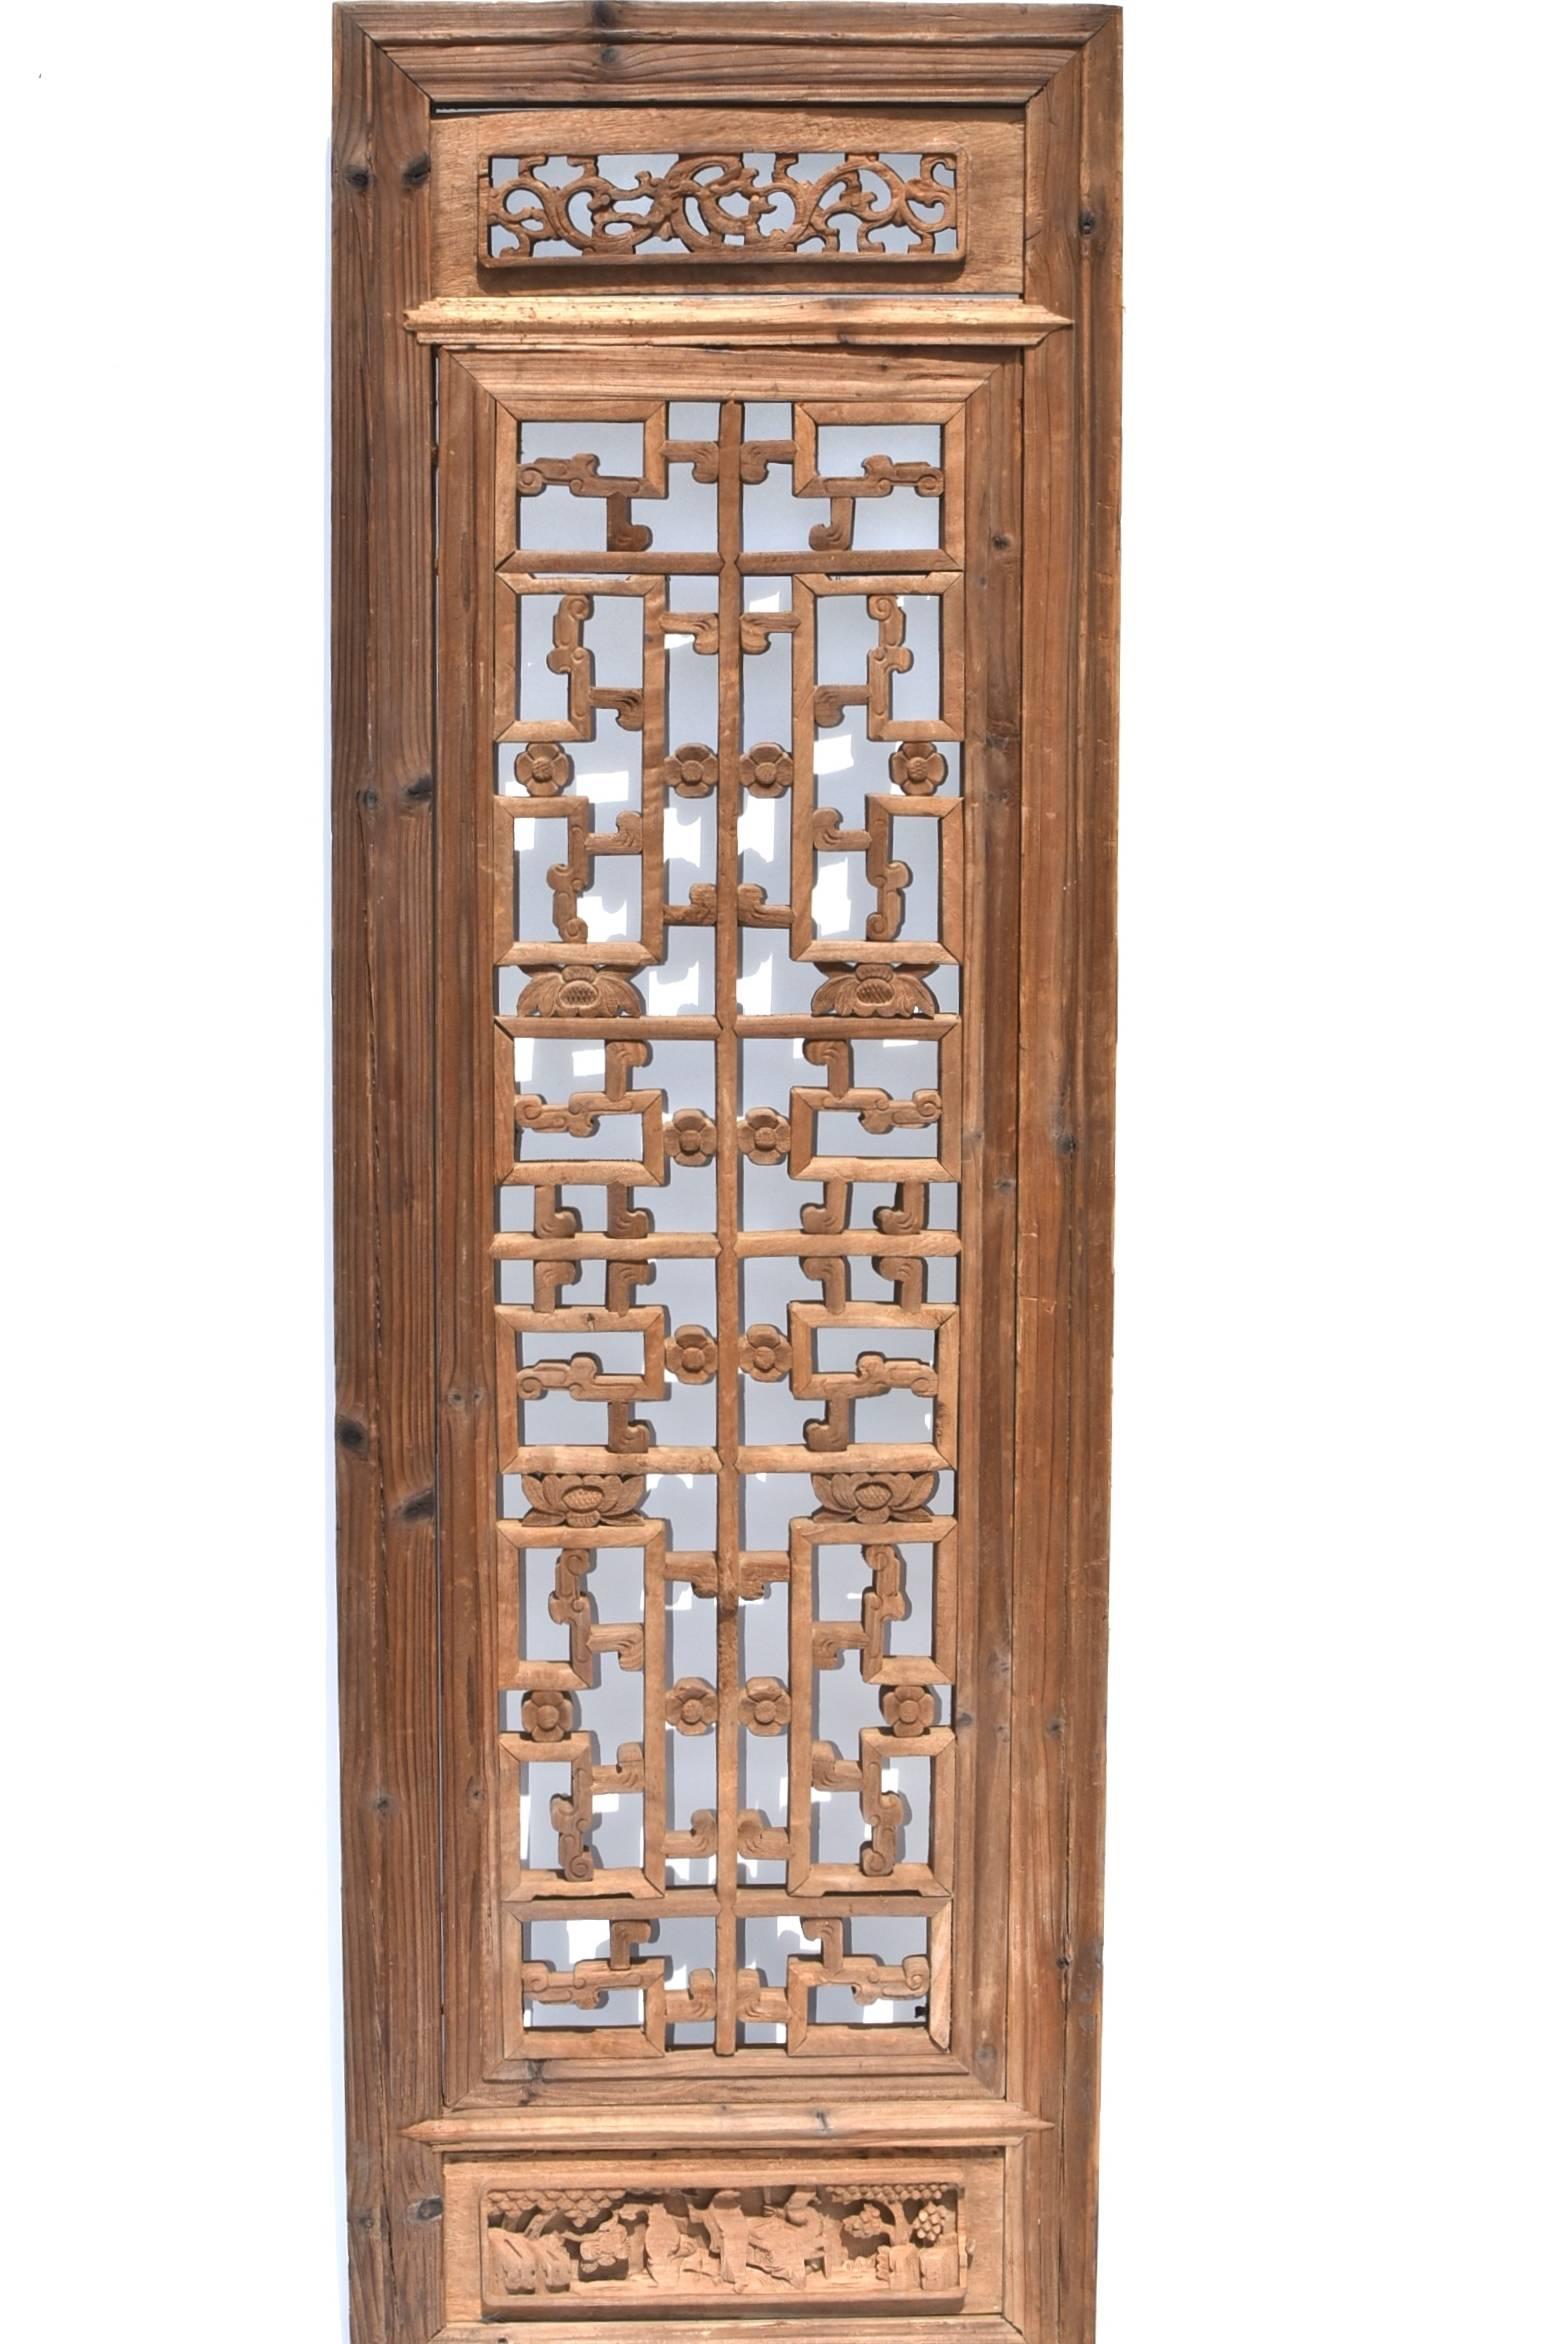 A beautiful 19th century screen with carved peonies and dragon scrolls. The construction is joinery with tenons and mortises. All painstakingly done by hand. This piece makes a sophisticated wall decoration besides being a screen. Solid wood.